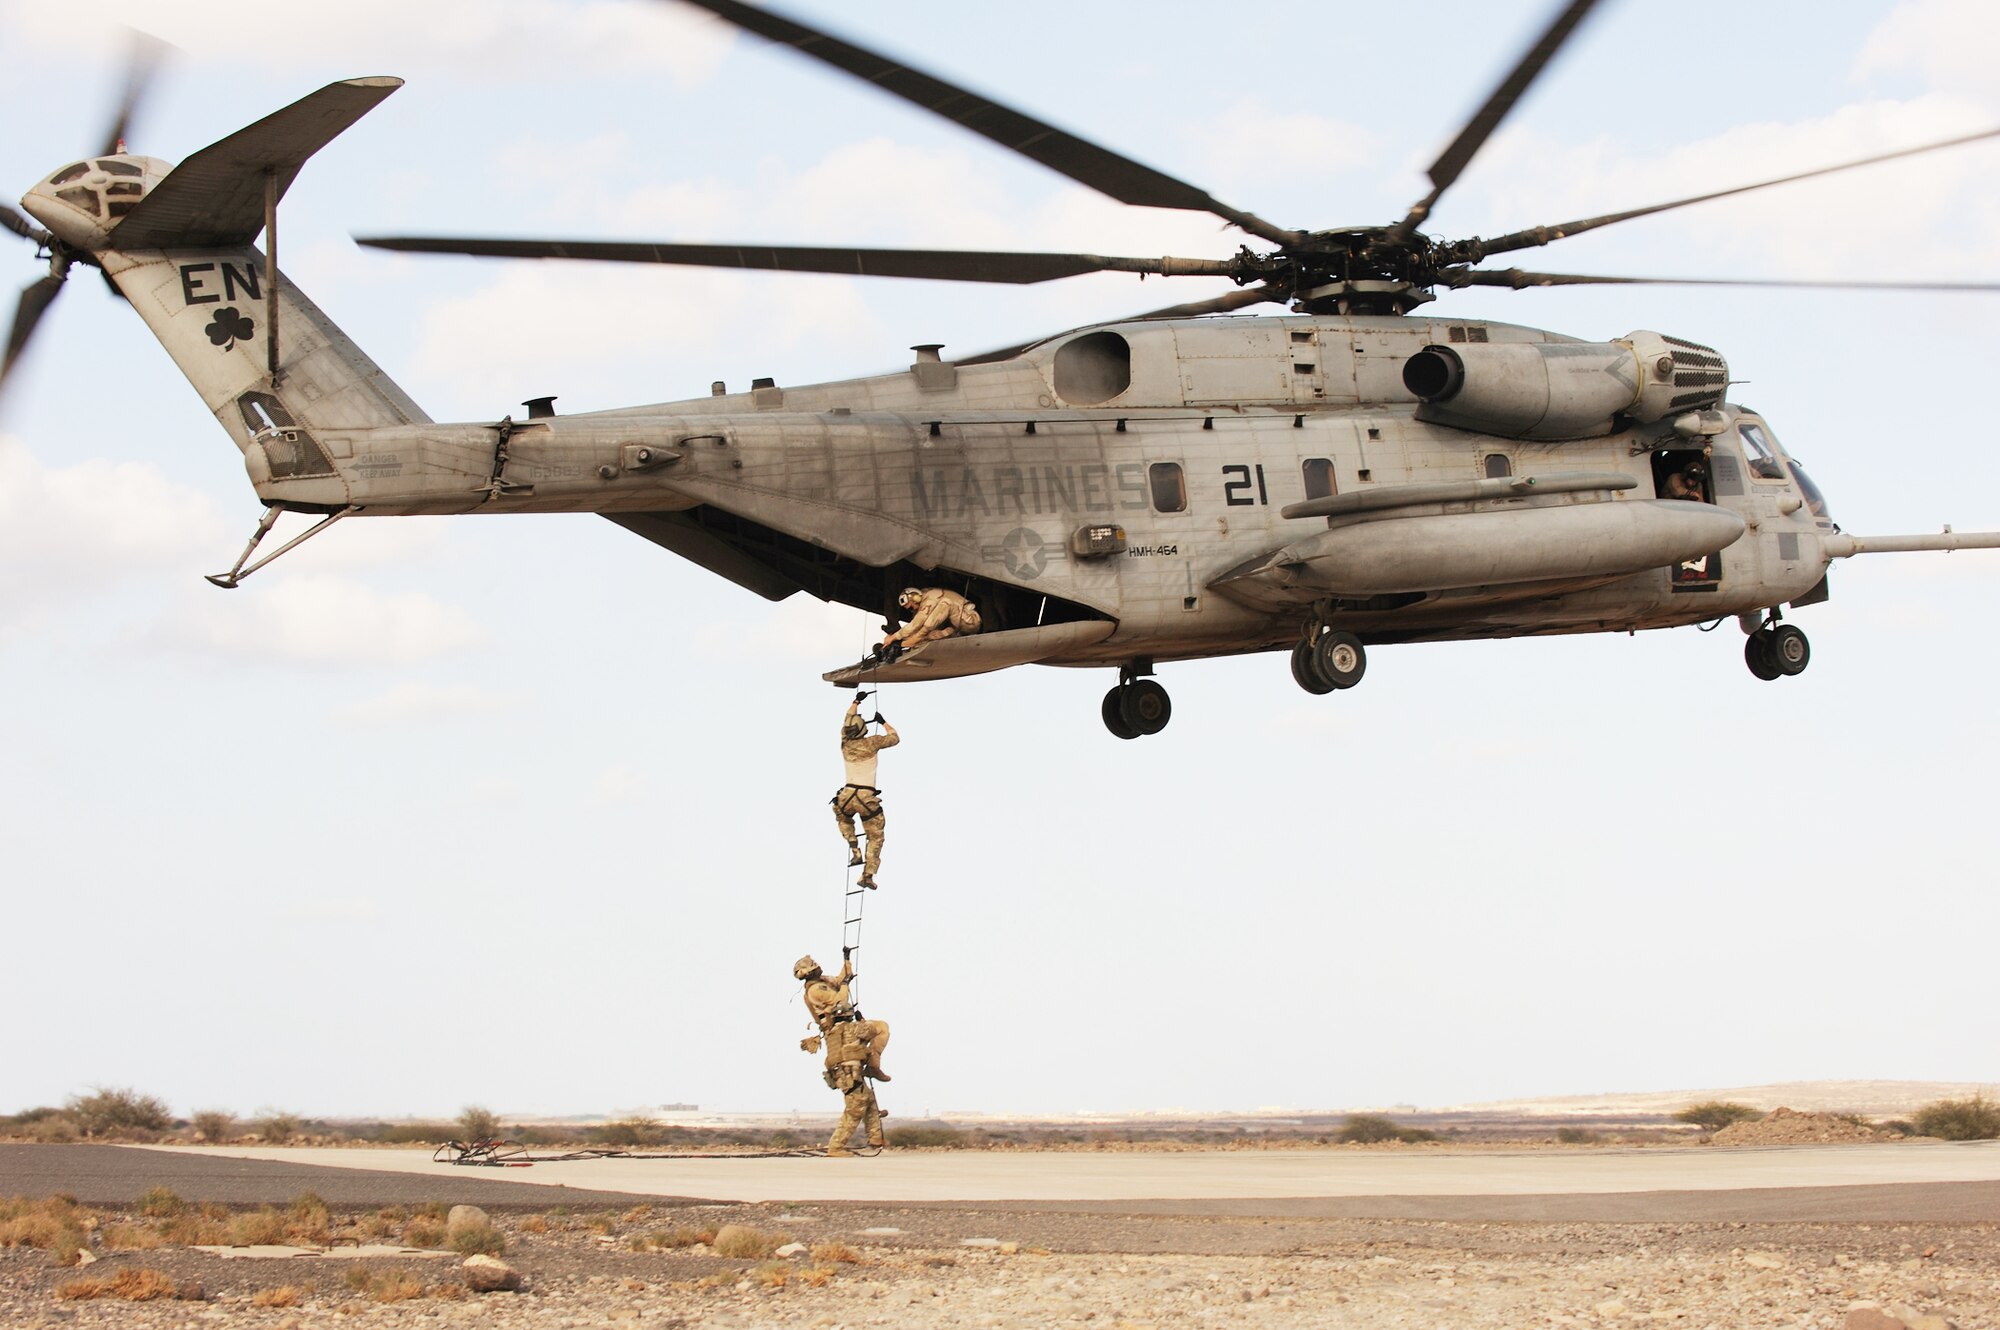 Air Force pararescuemen conduct a combat insertion and extraction exercise from a Marine CH-53 Sea Stallion helicopter in Djibouti, Africa, Jan. 5, 2010.  (U.S. Air Force photo/Master Sgt. Jeremiah Erickson)